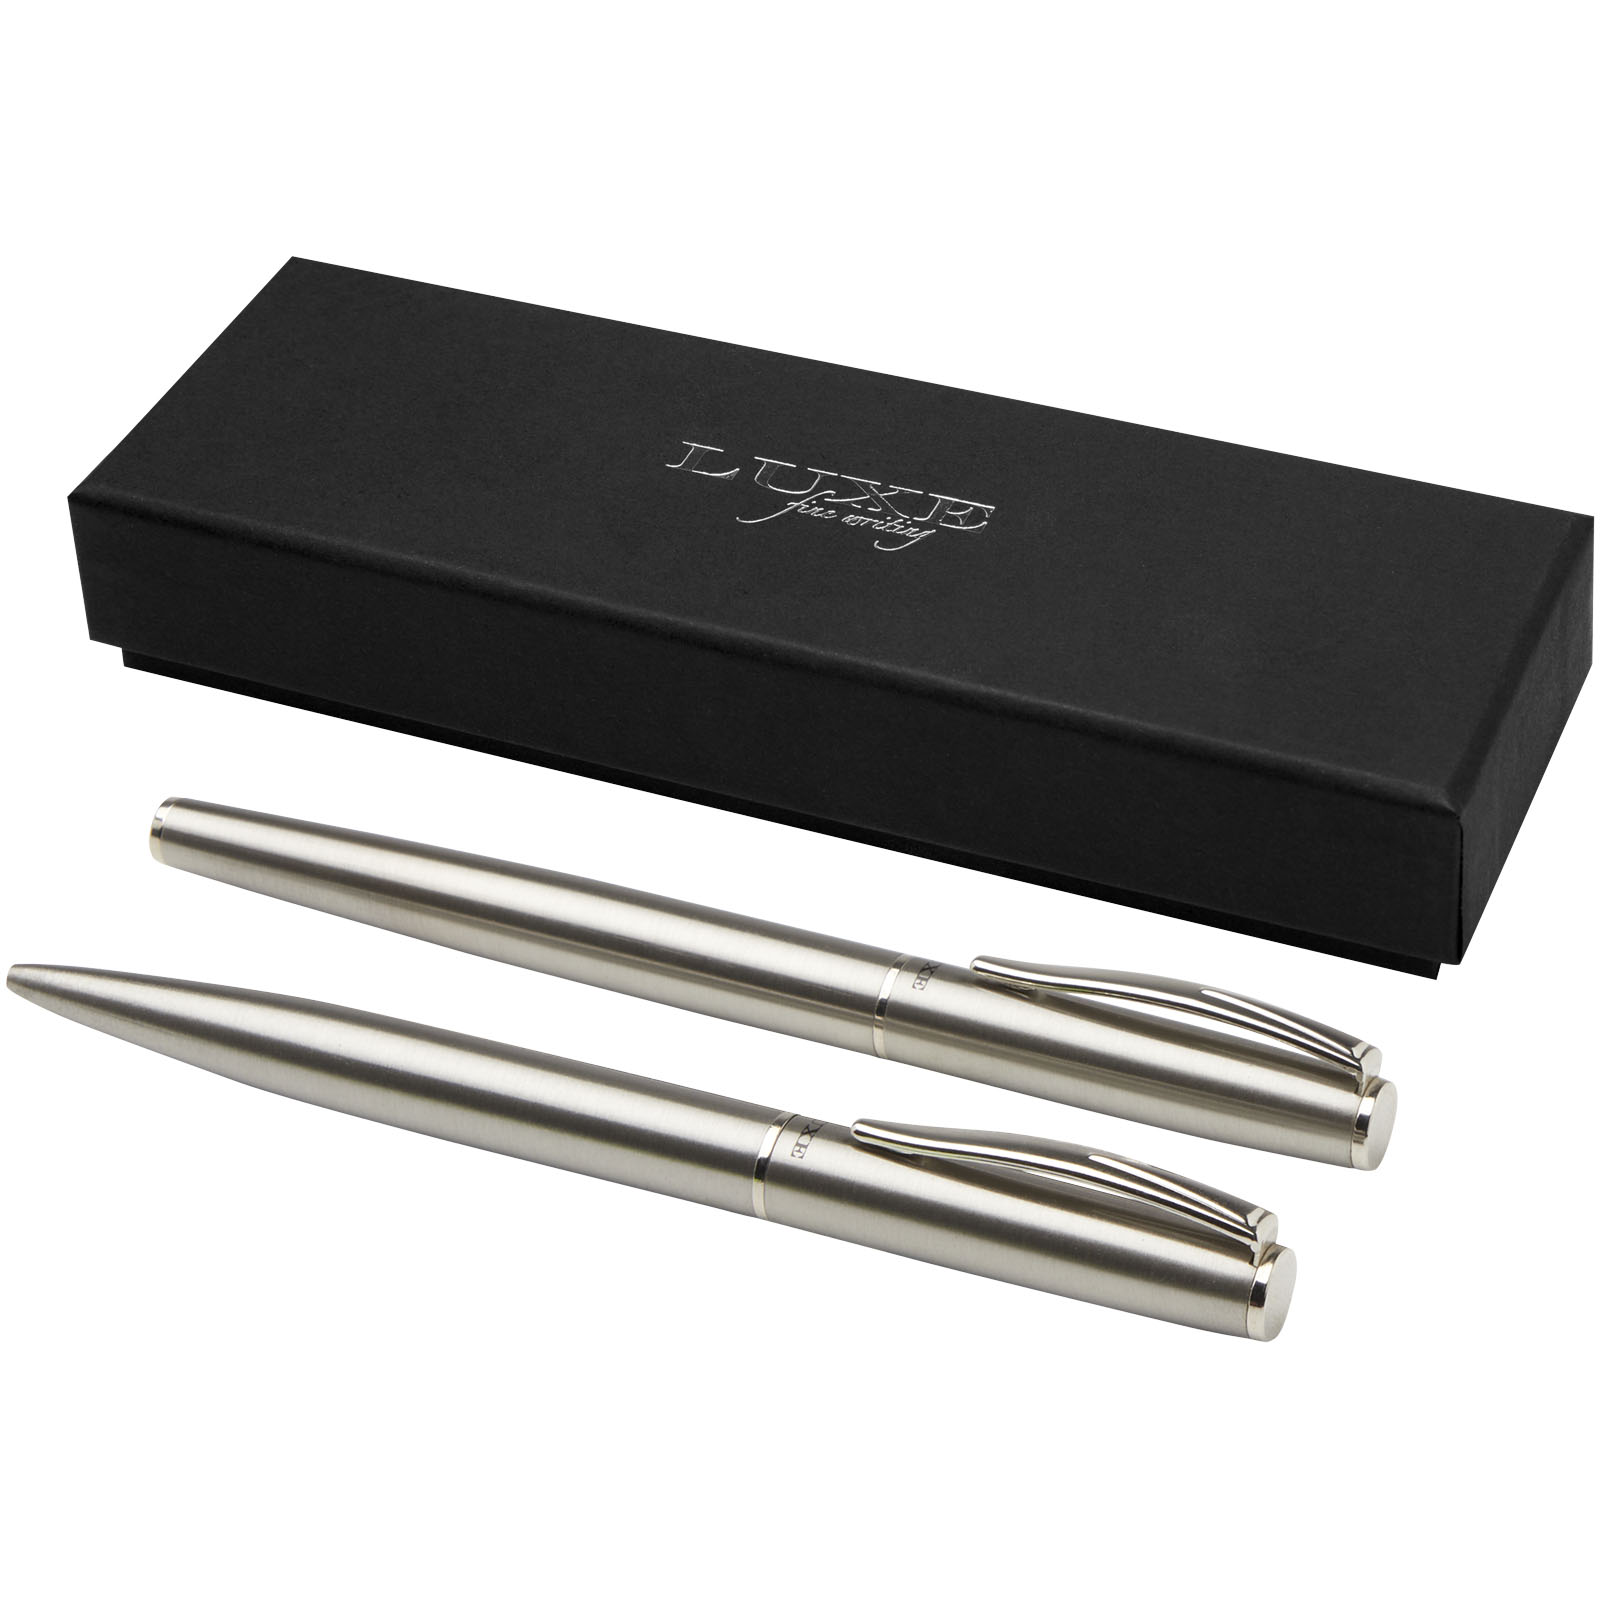 Pens & Writing - Didimis recycled stainless steel ballpoint and rollerball pen set